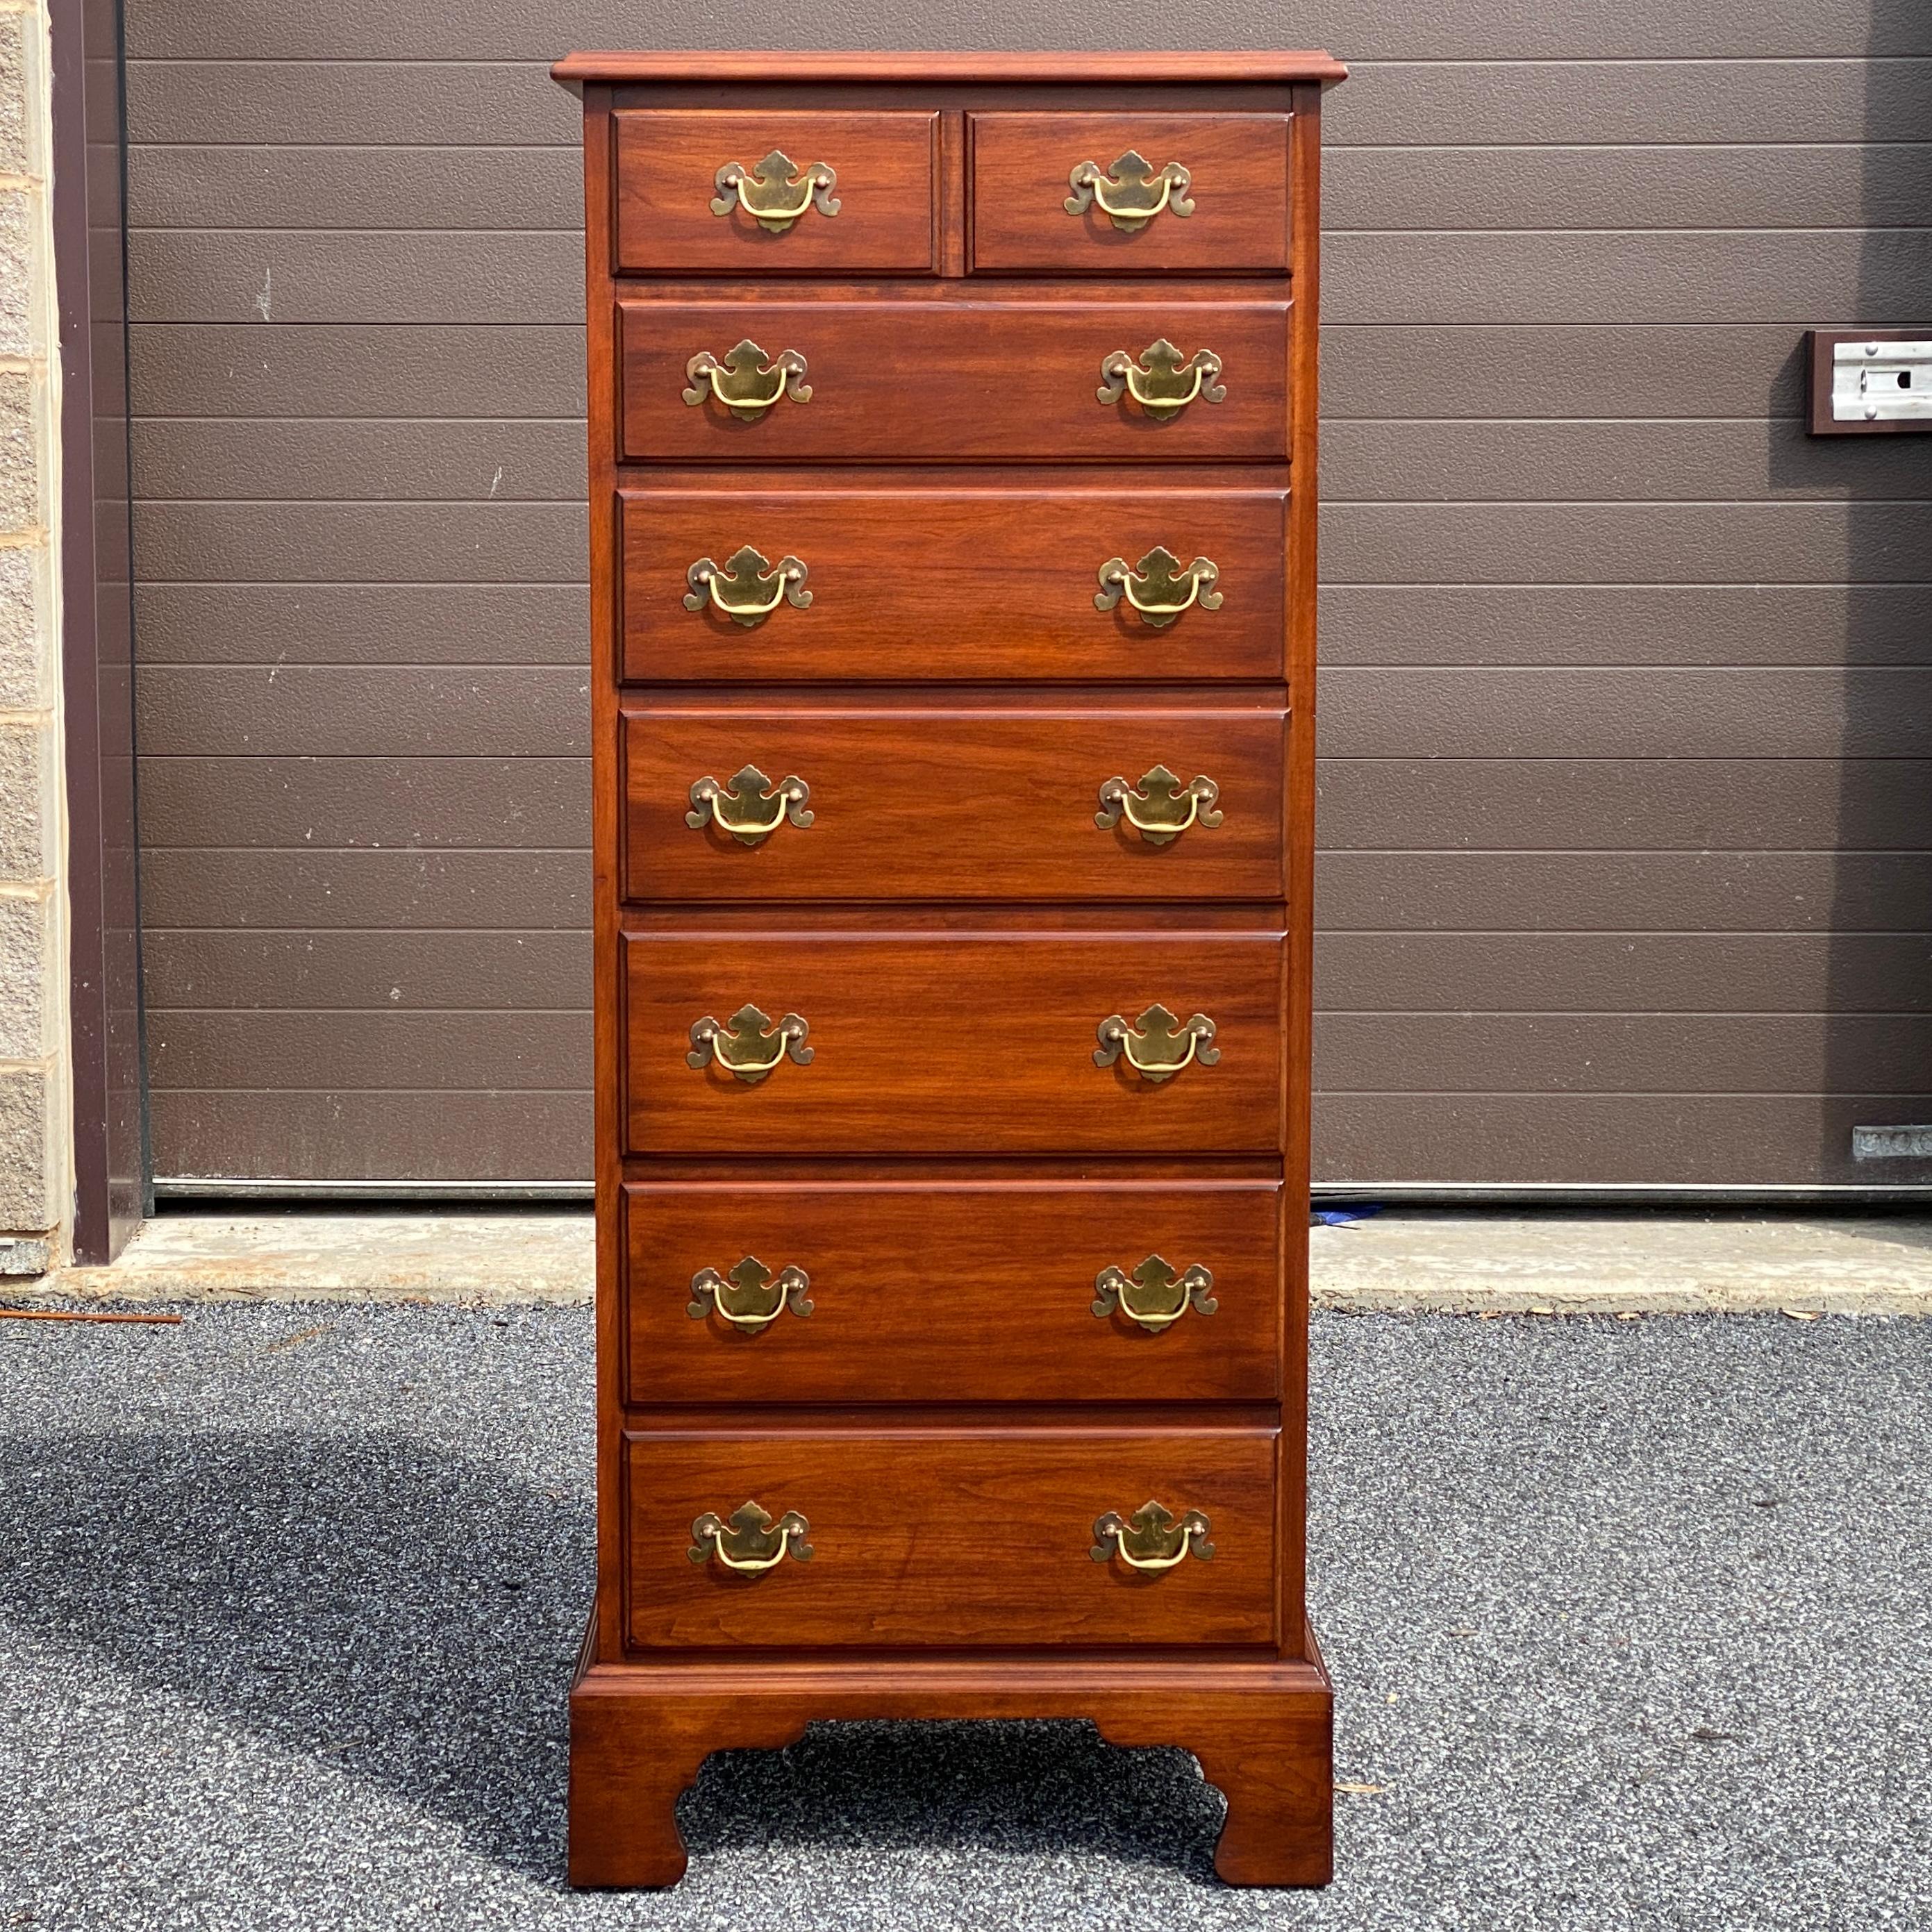 Henkel Harris Virginia Galleries Princess Anne Lingerie Chest in Solid Cherry circa 1974. Seven dovetailed drawers with the top two having the original vintage orange felt drawer bottom inserts and the top drawer also having the original orange felt